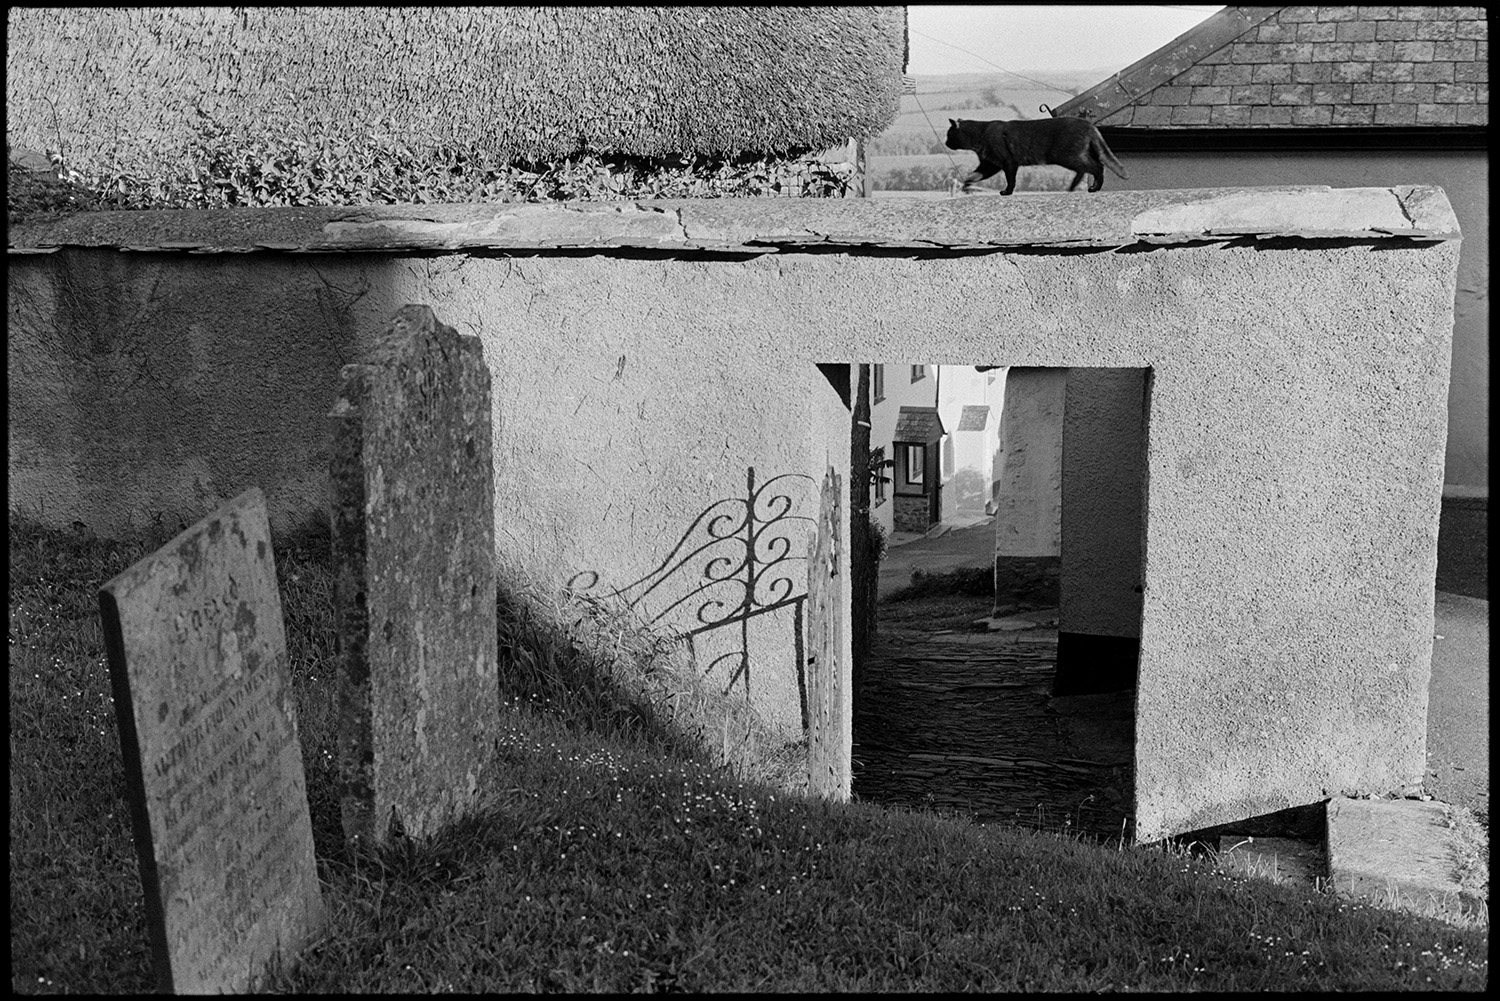 Village graveyard with cob wall and people walking in passageway, shadows. 
[A cat walking across the top of a cob archway to Winkleigh churchyard. Gravestones and the shadow of the gate to the churchyard are visible, as well as the cobbled steps leading up to the churchyard.]